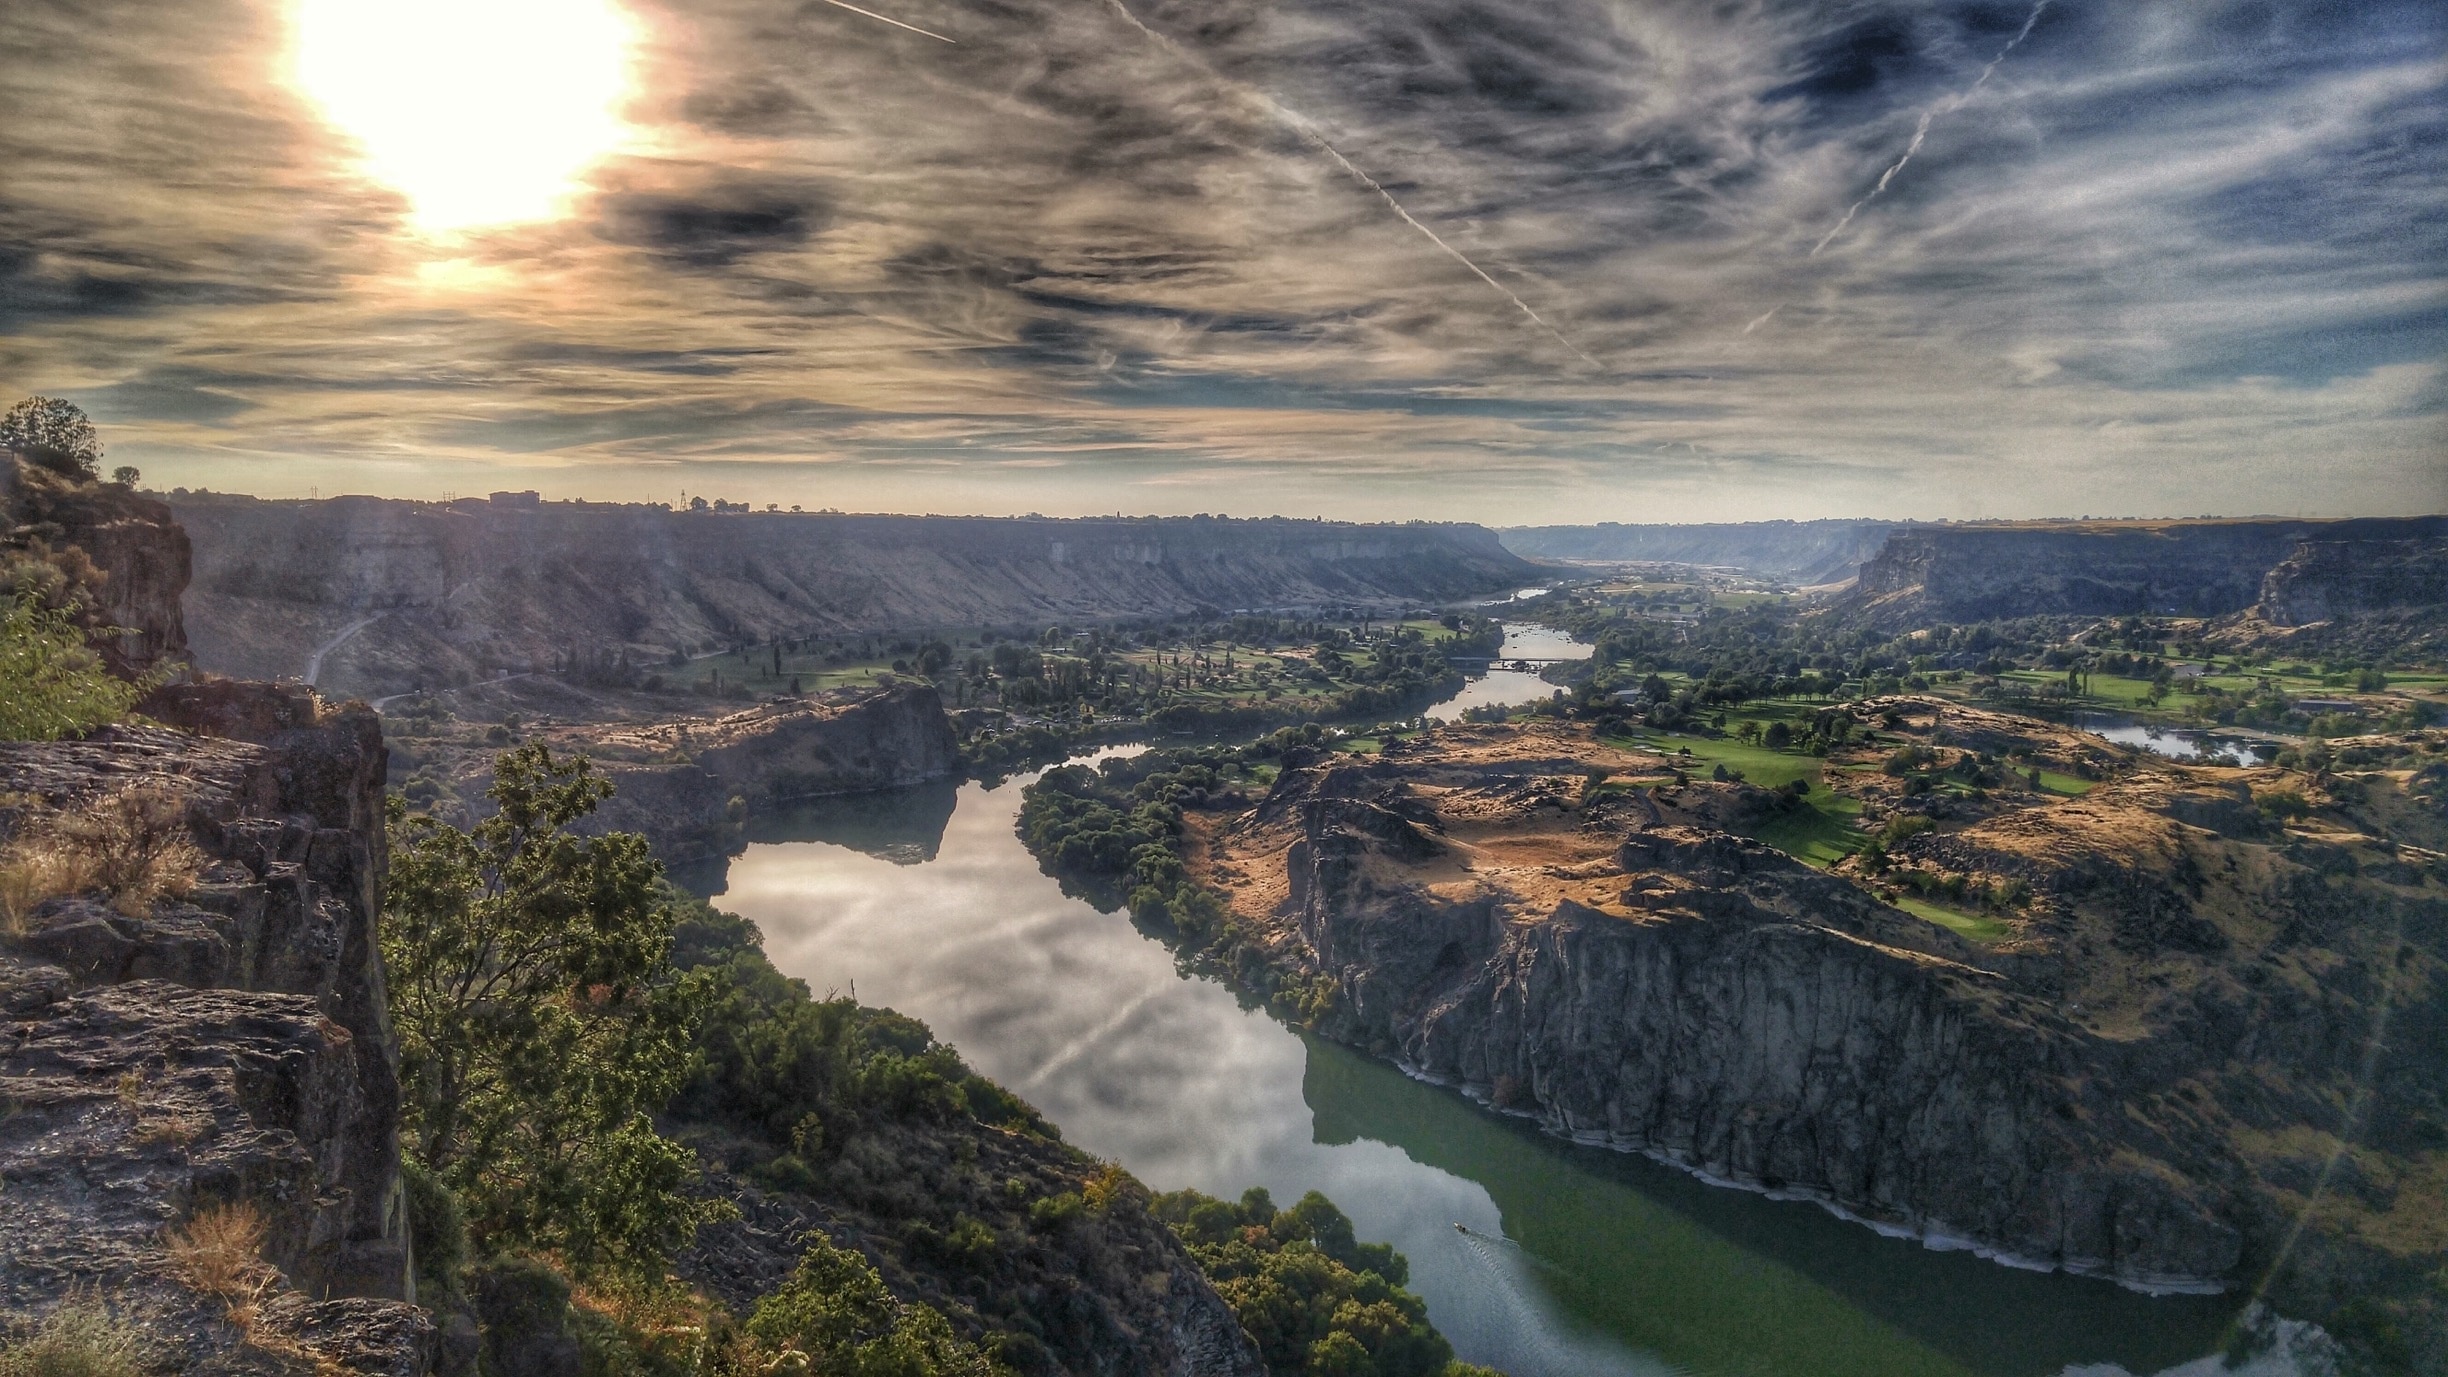 Twin Falls, Idaho. Home to the Perrine Bridge and the daredevils that base jump off it. Not to mention beautiful, unforgettable views of the Canyons and the Snake River. One of my favorite places to visit In the USA. 